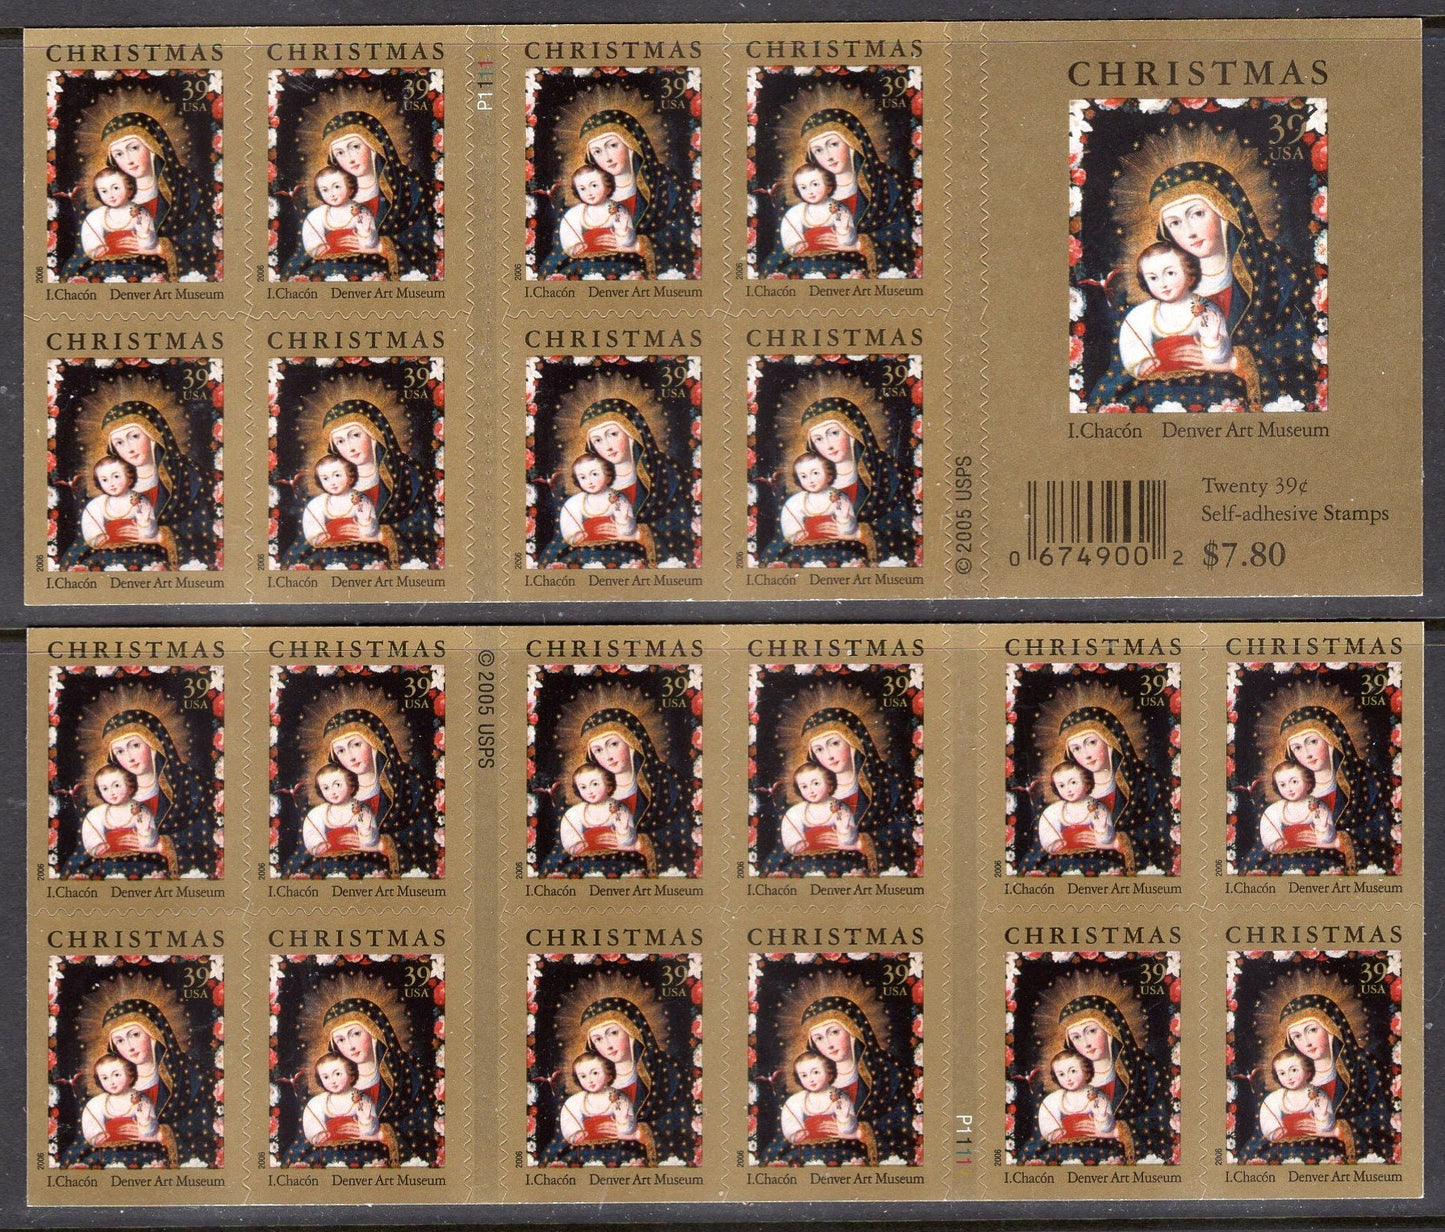 20 CHRISTMAS MADONNA with BIRD by Chacon Fresh Bright 37c Self-adhesive Postage Stamps – Quantity Available - Issued in 2006-